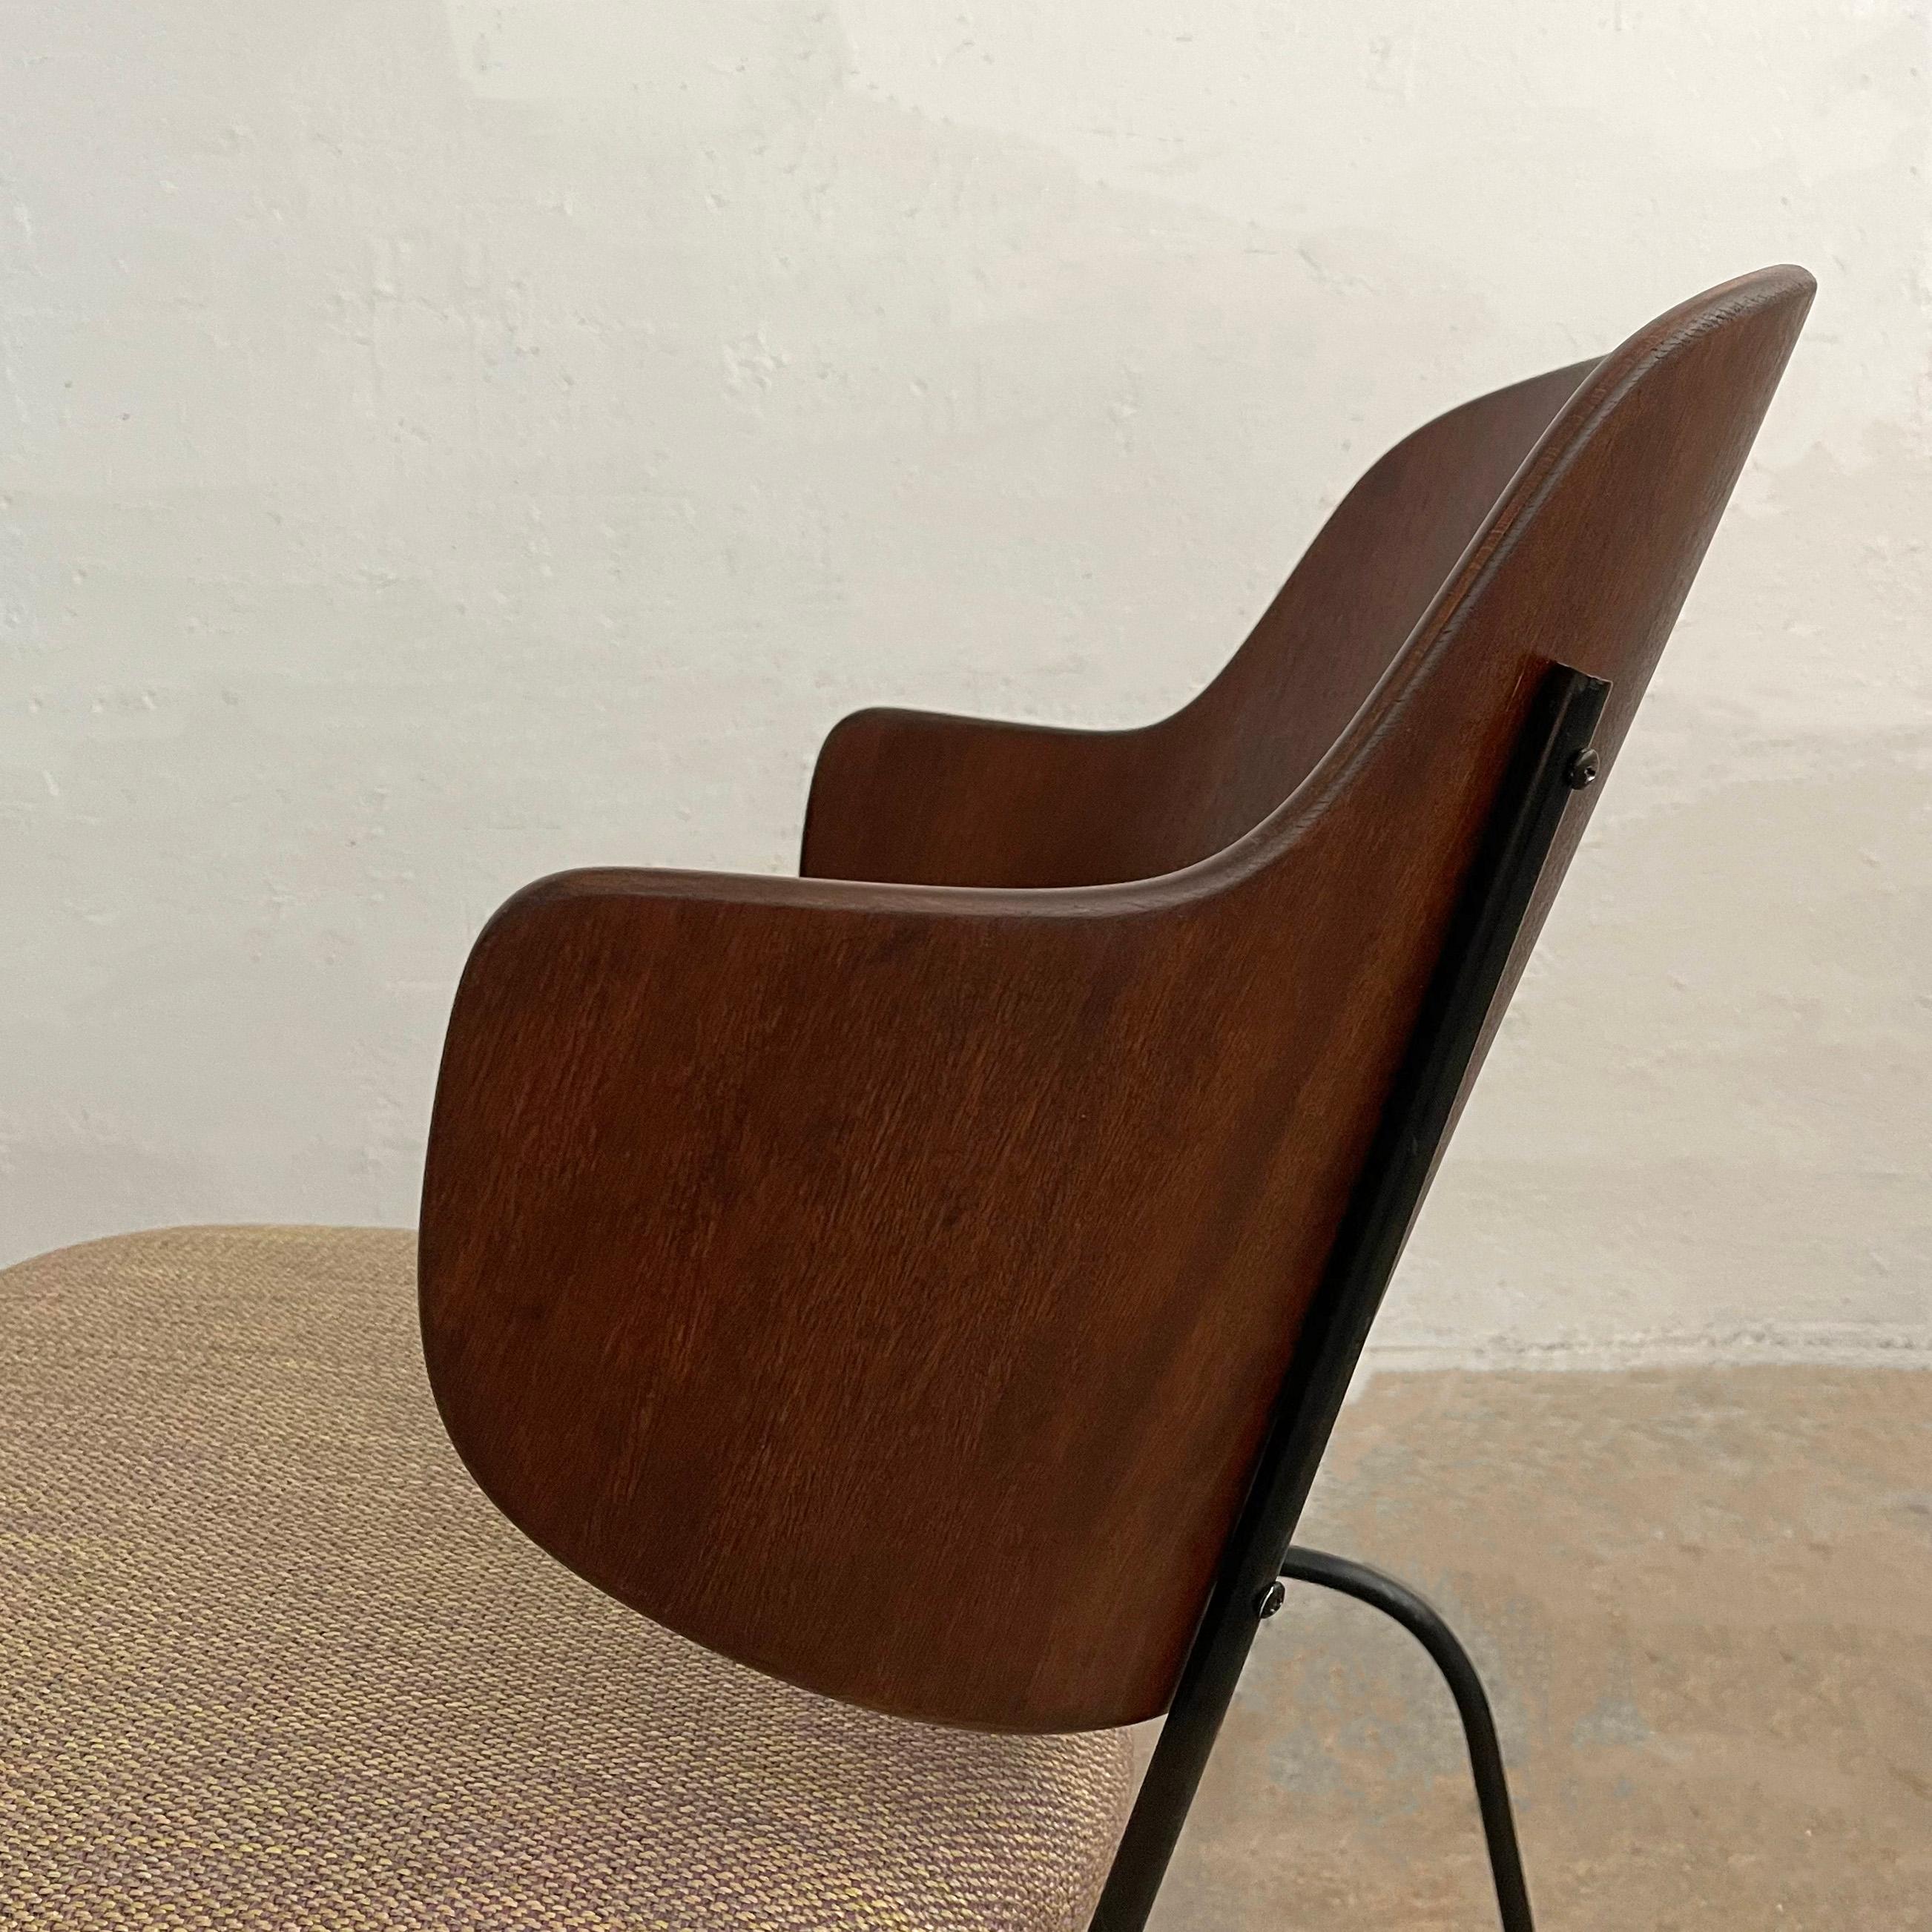 Pair Of Rare Model Penguin Chairs By Ib Kofod-Larsen For Selig In Good Condition For Sale In Brooklyn, NY